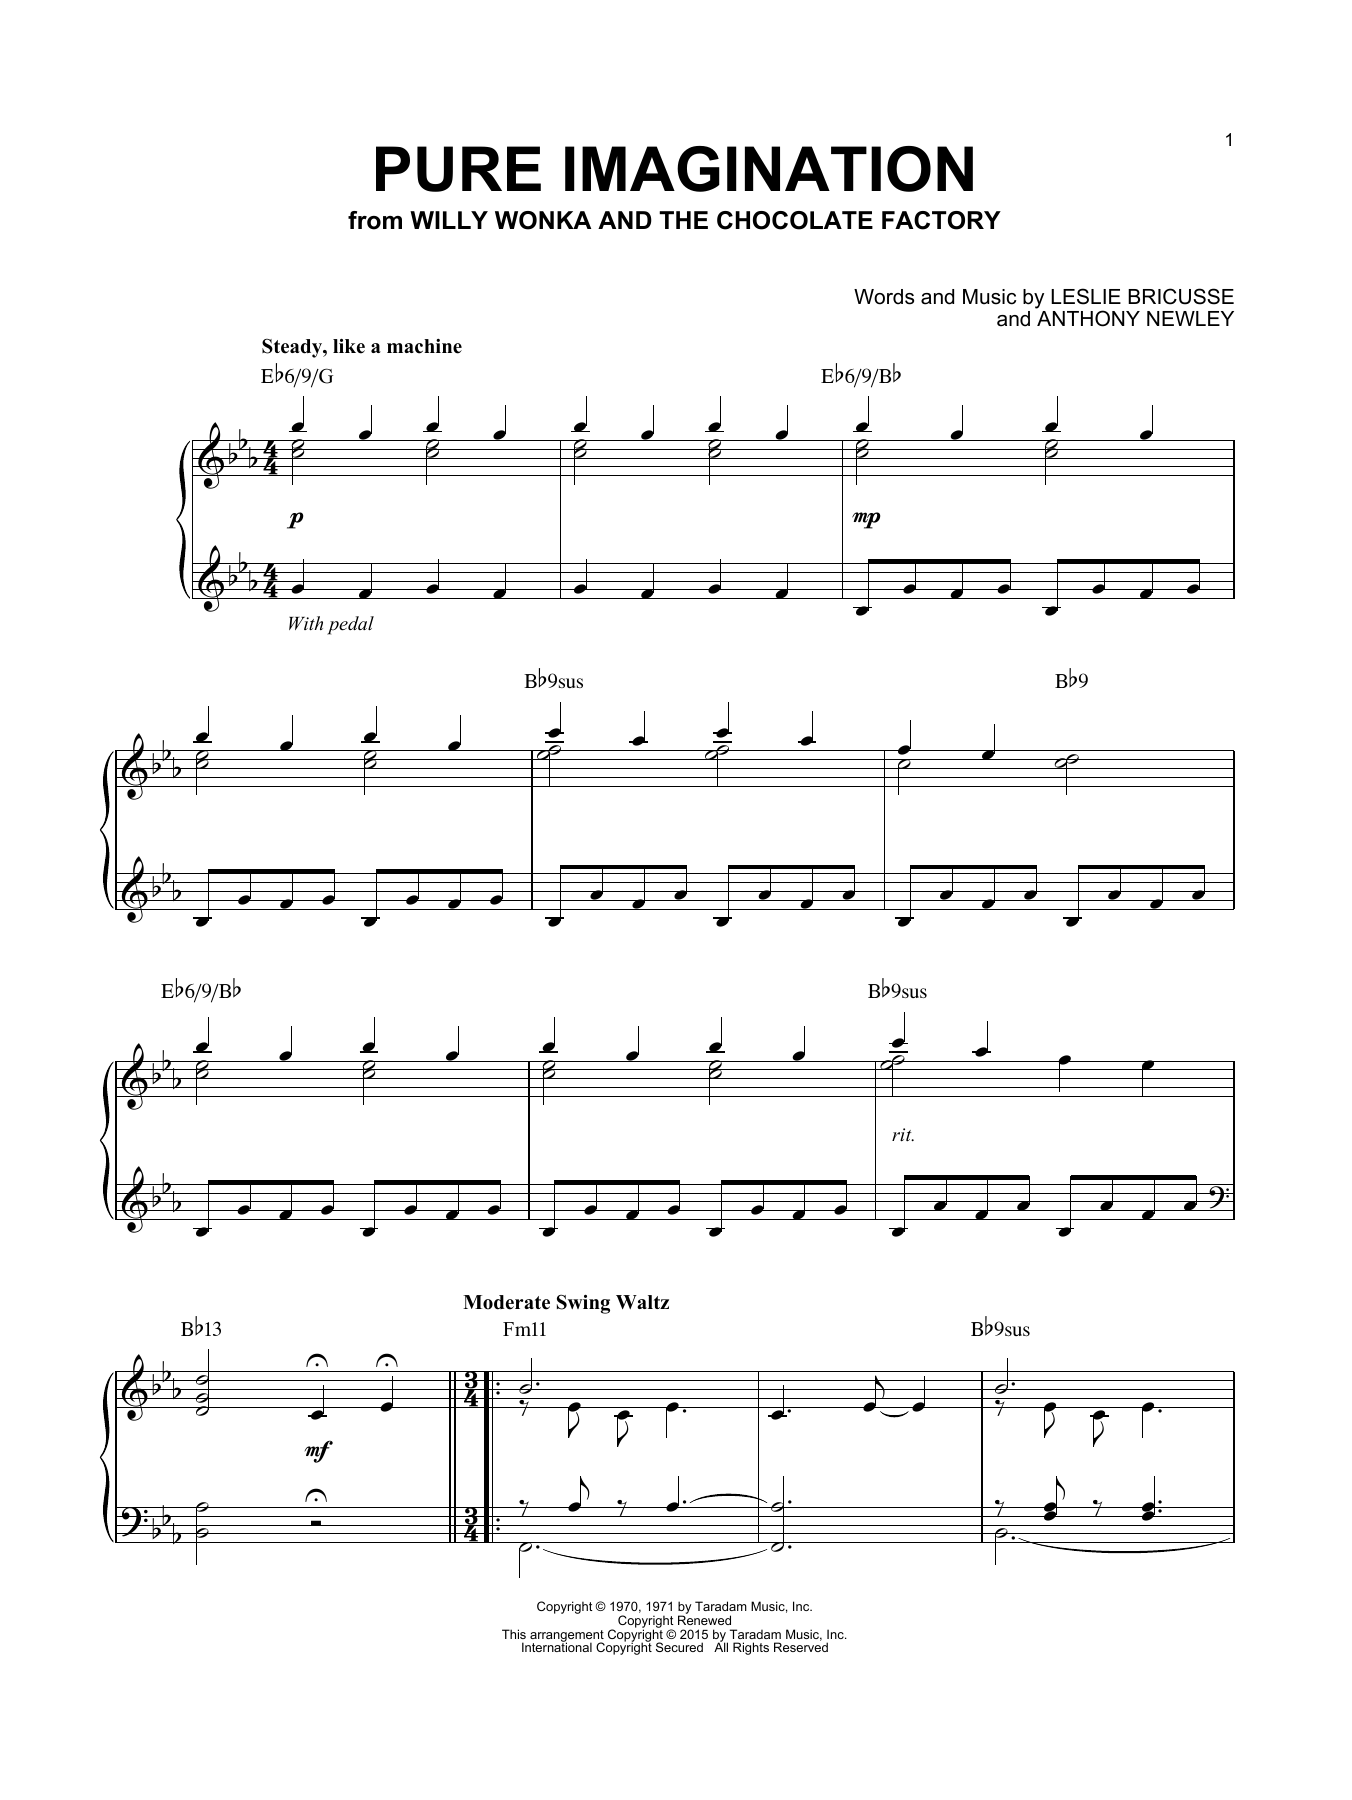 Download Willy Wonka & the Chocolate Factory Pure Imagination [Jazz version] (arr. B Sheet Music